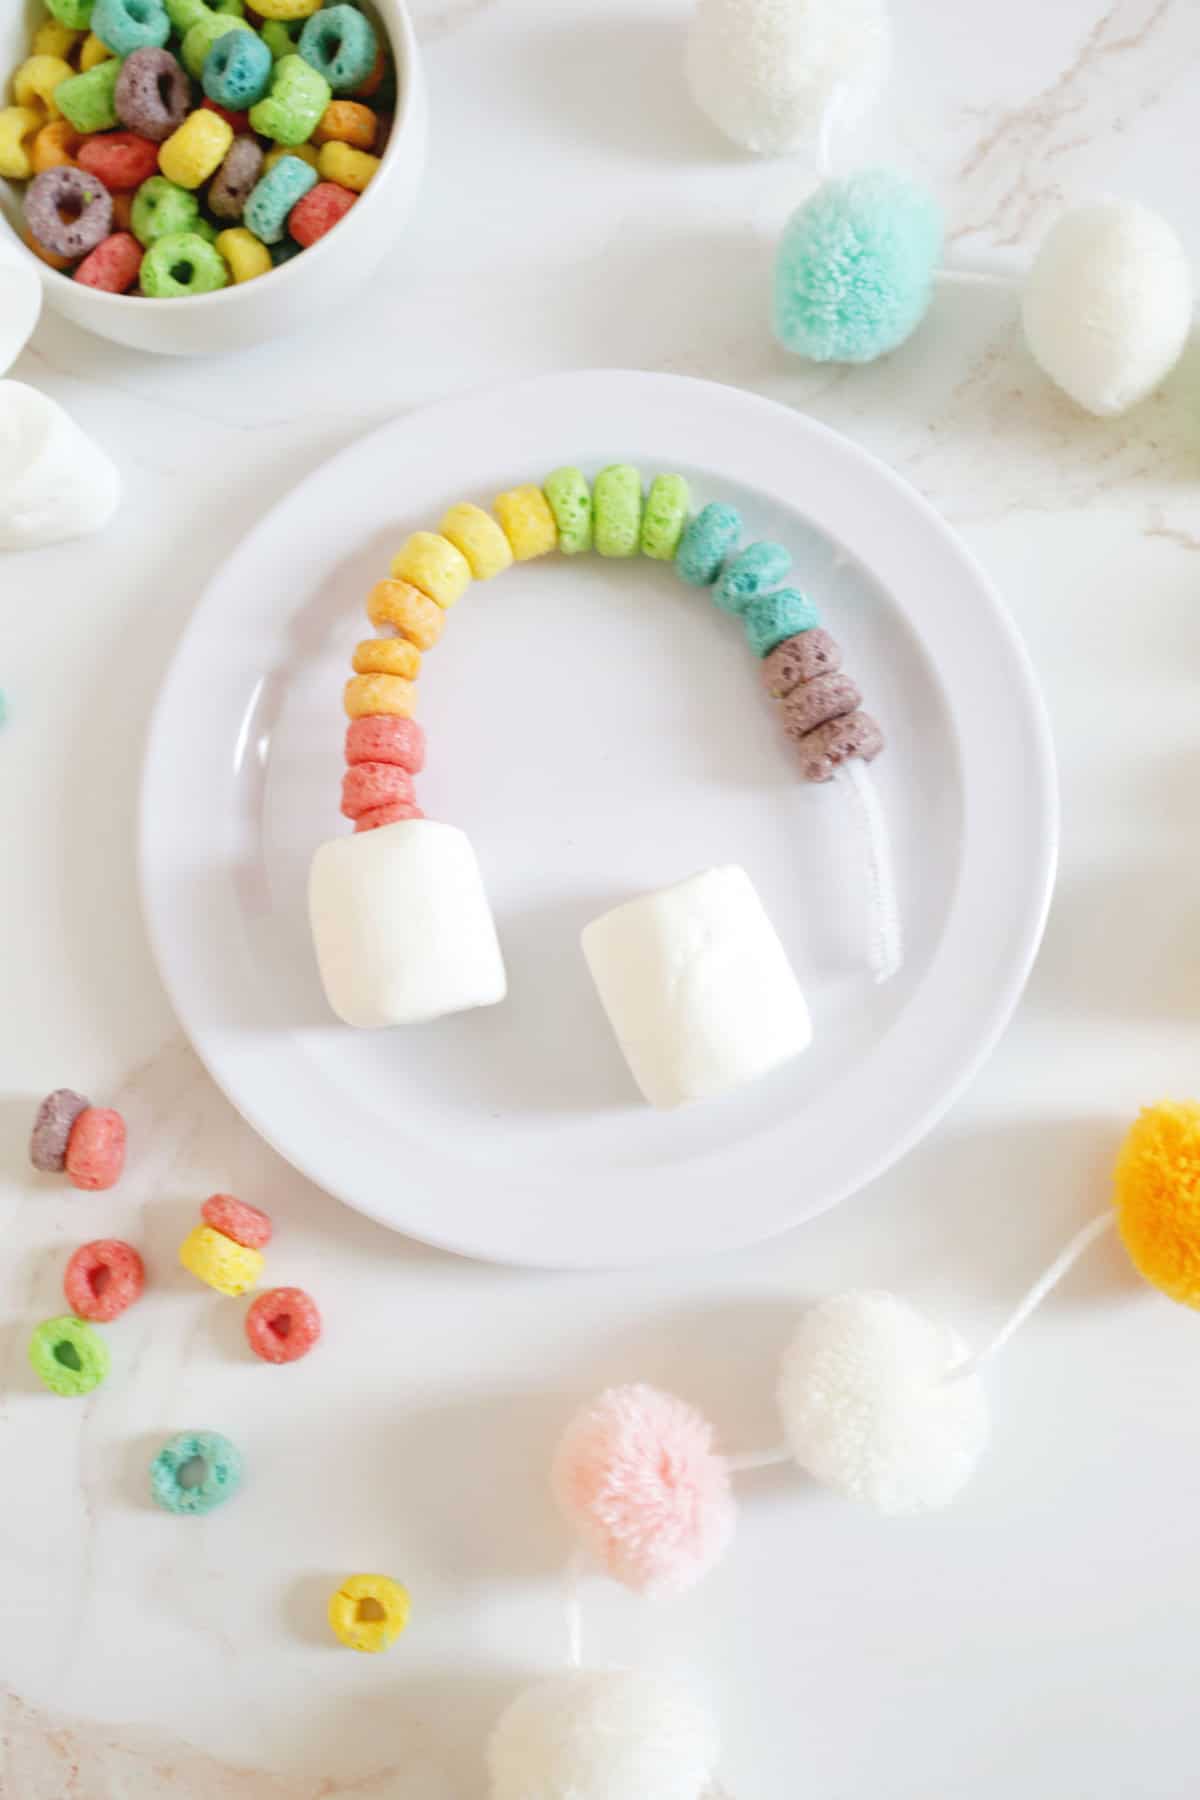 fruit loops rainbow with marshmallow cloud